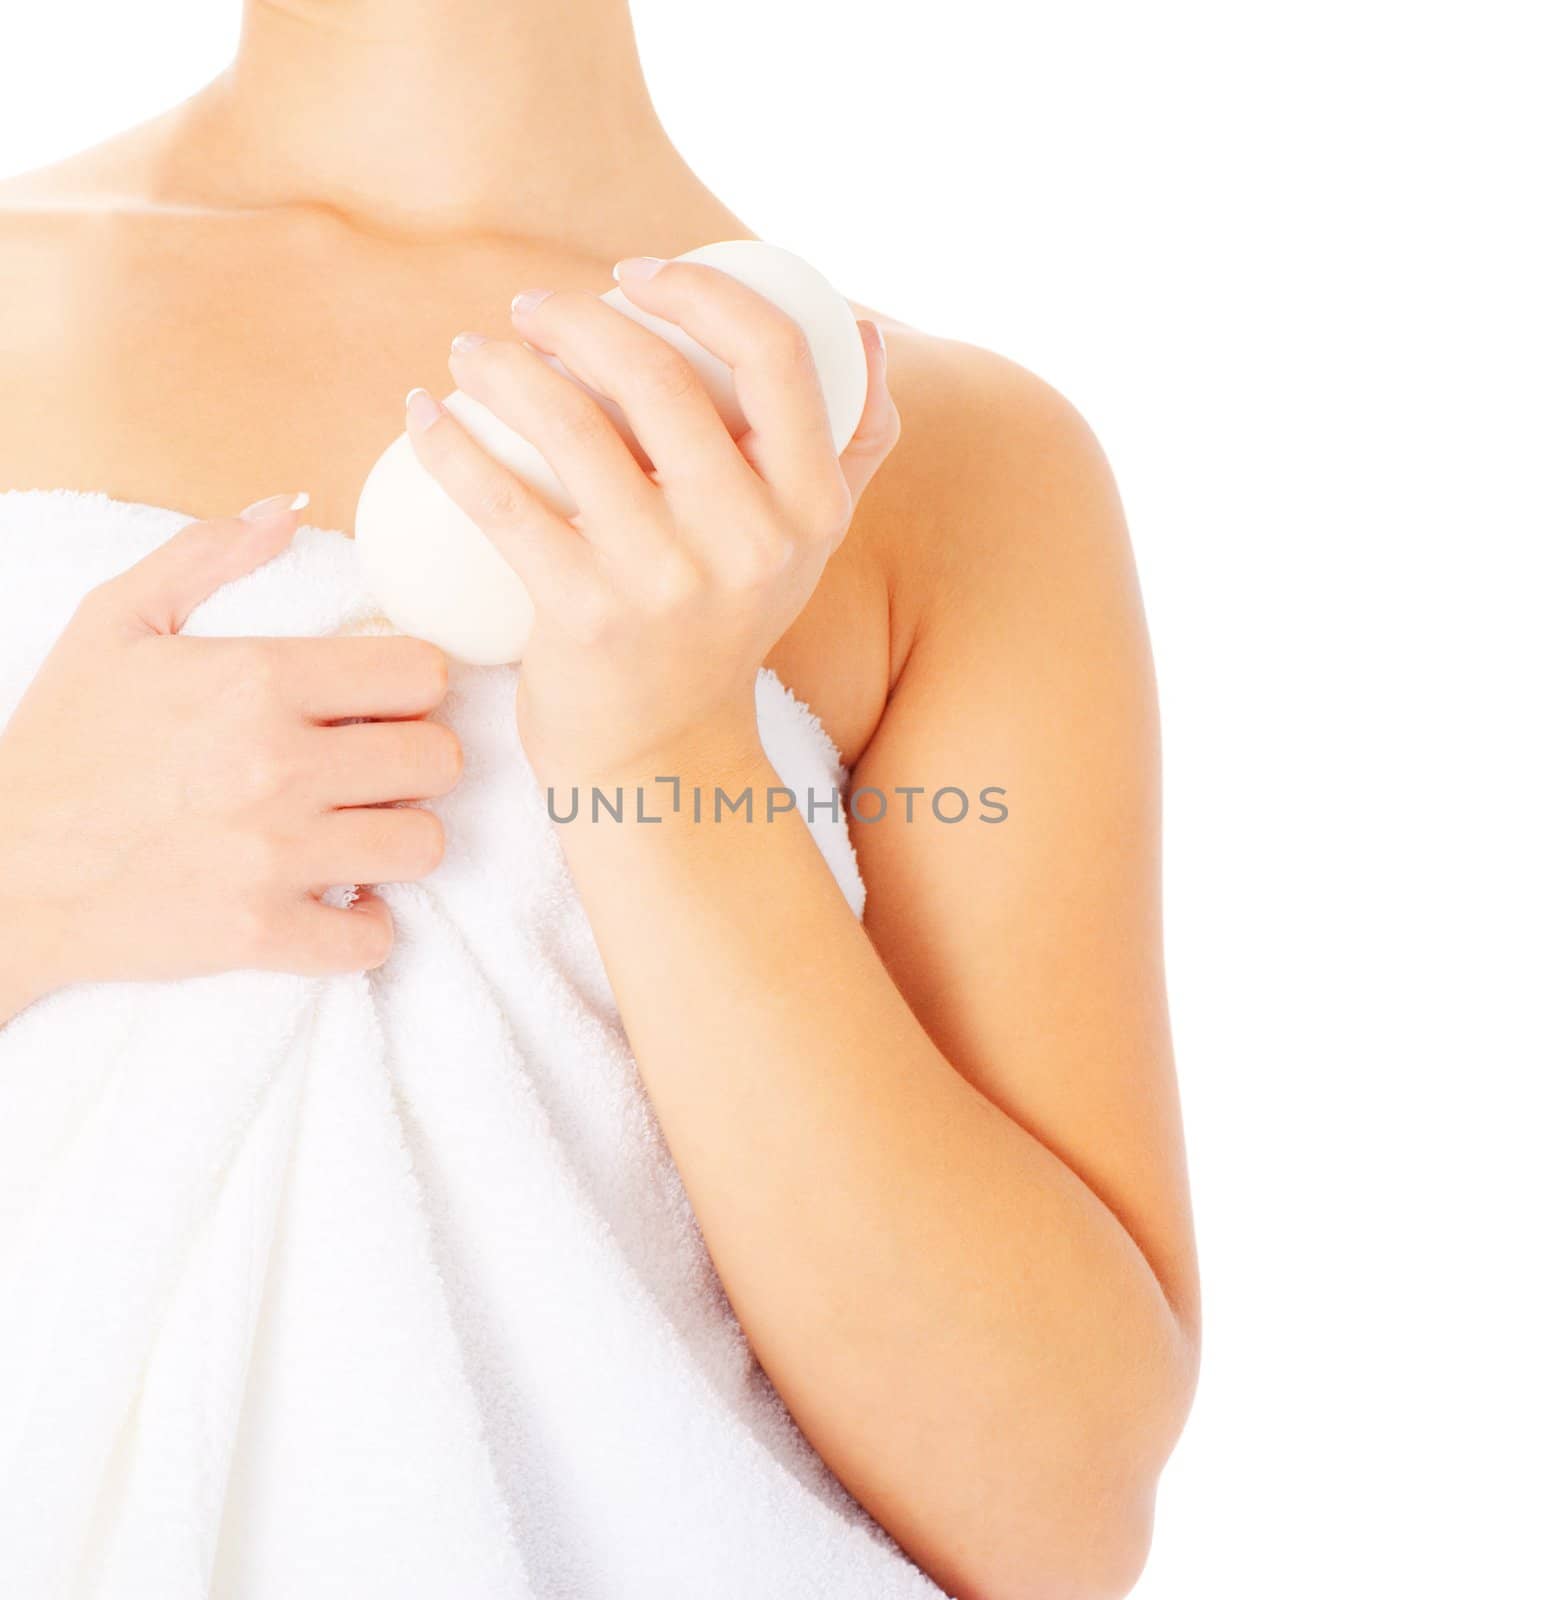 Close up of woman wrapped in a towel holding soap, from a complete series of images.